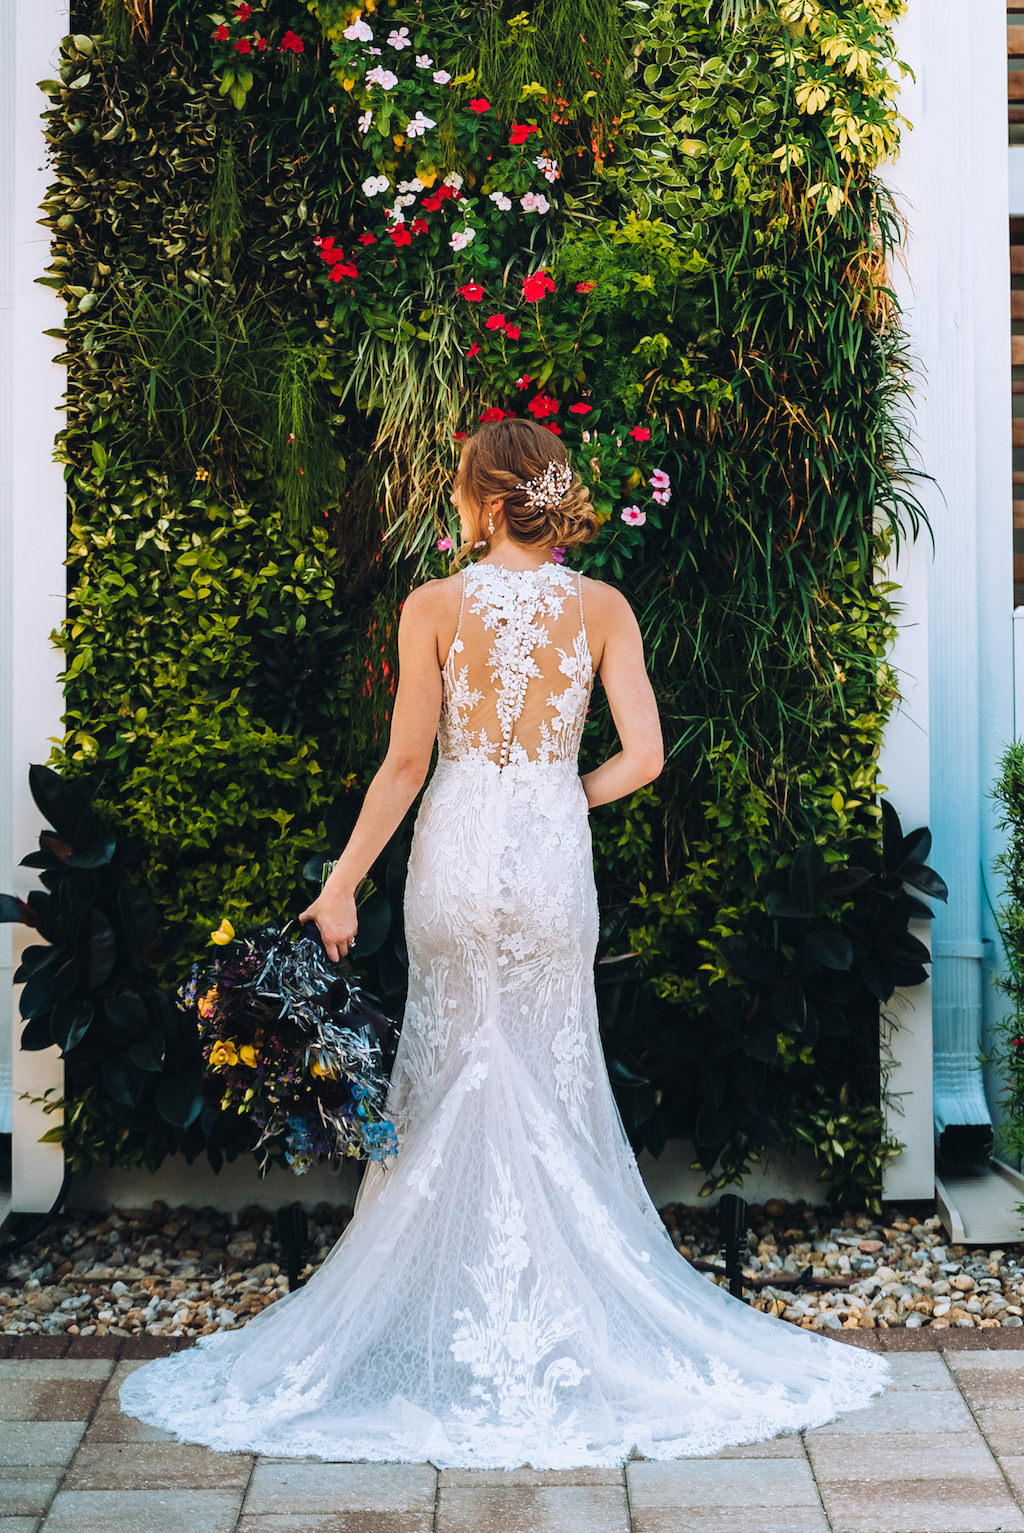 Tampa Bay Bride Outdoor Garden Wedding Portrait in Lace and Illusion Back with Buttons Fitted Silhouette Wedding Dress with Dark Colored Bridal Floral Bouquet | Wedding Attire Truly Forever Bridal | Wedding Hair and Makeup Michele Renee the Studio | Wedding Planner Special Moments Event Planning | Styled Shoot